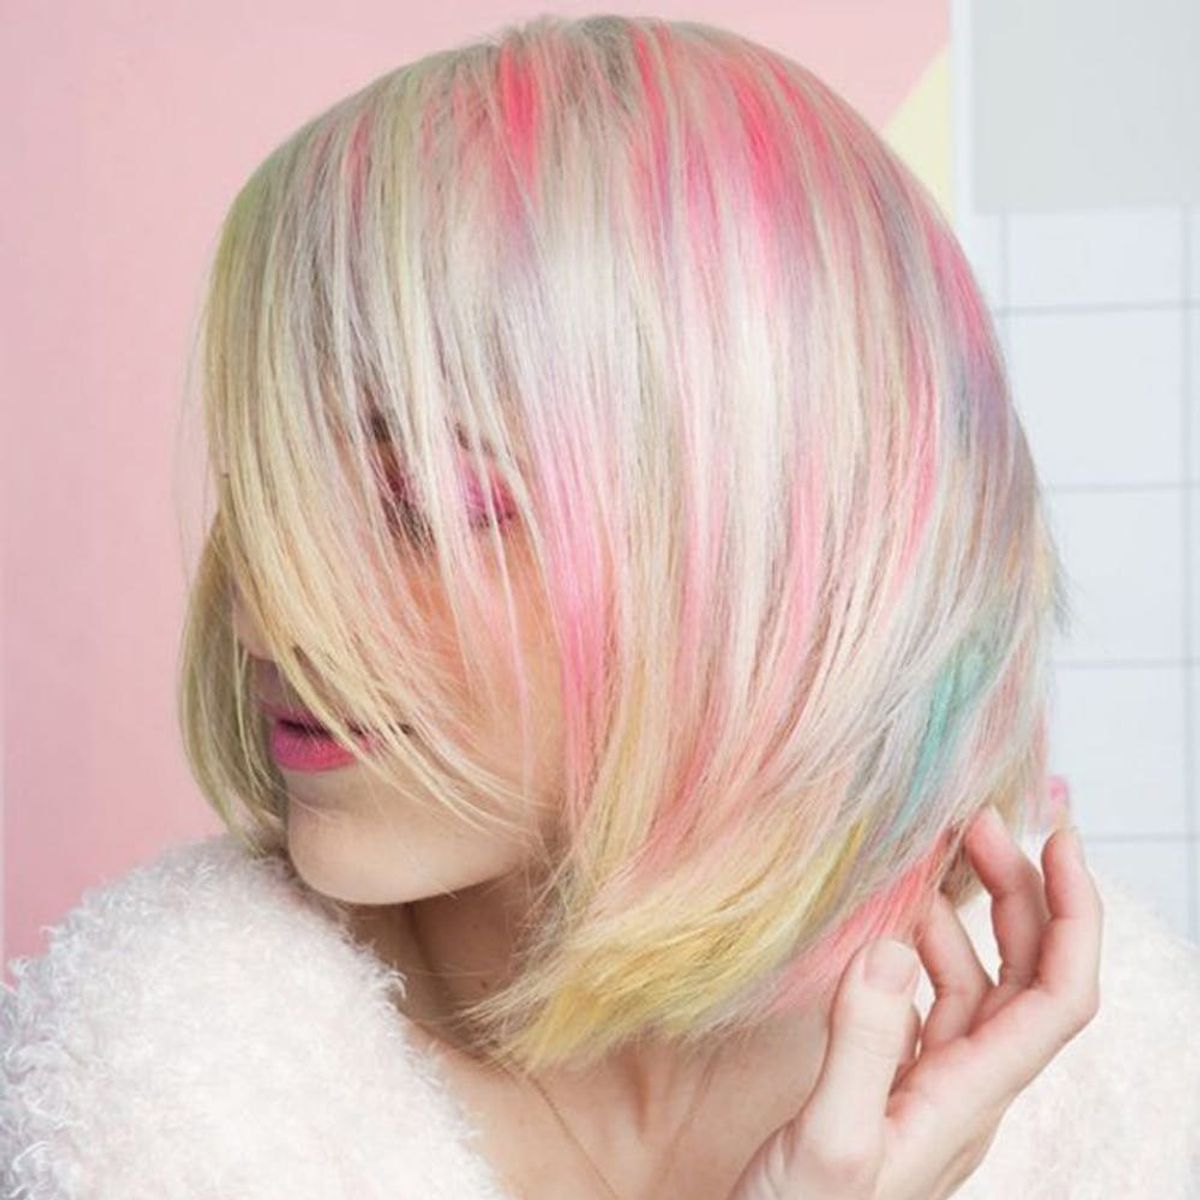 19 Colorful Hairstyles to Rock in the New Year